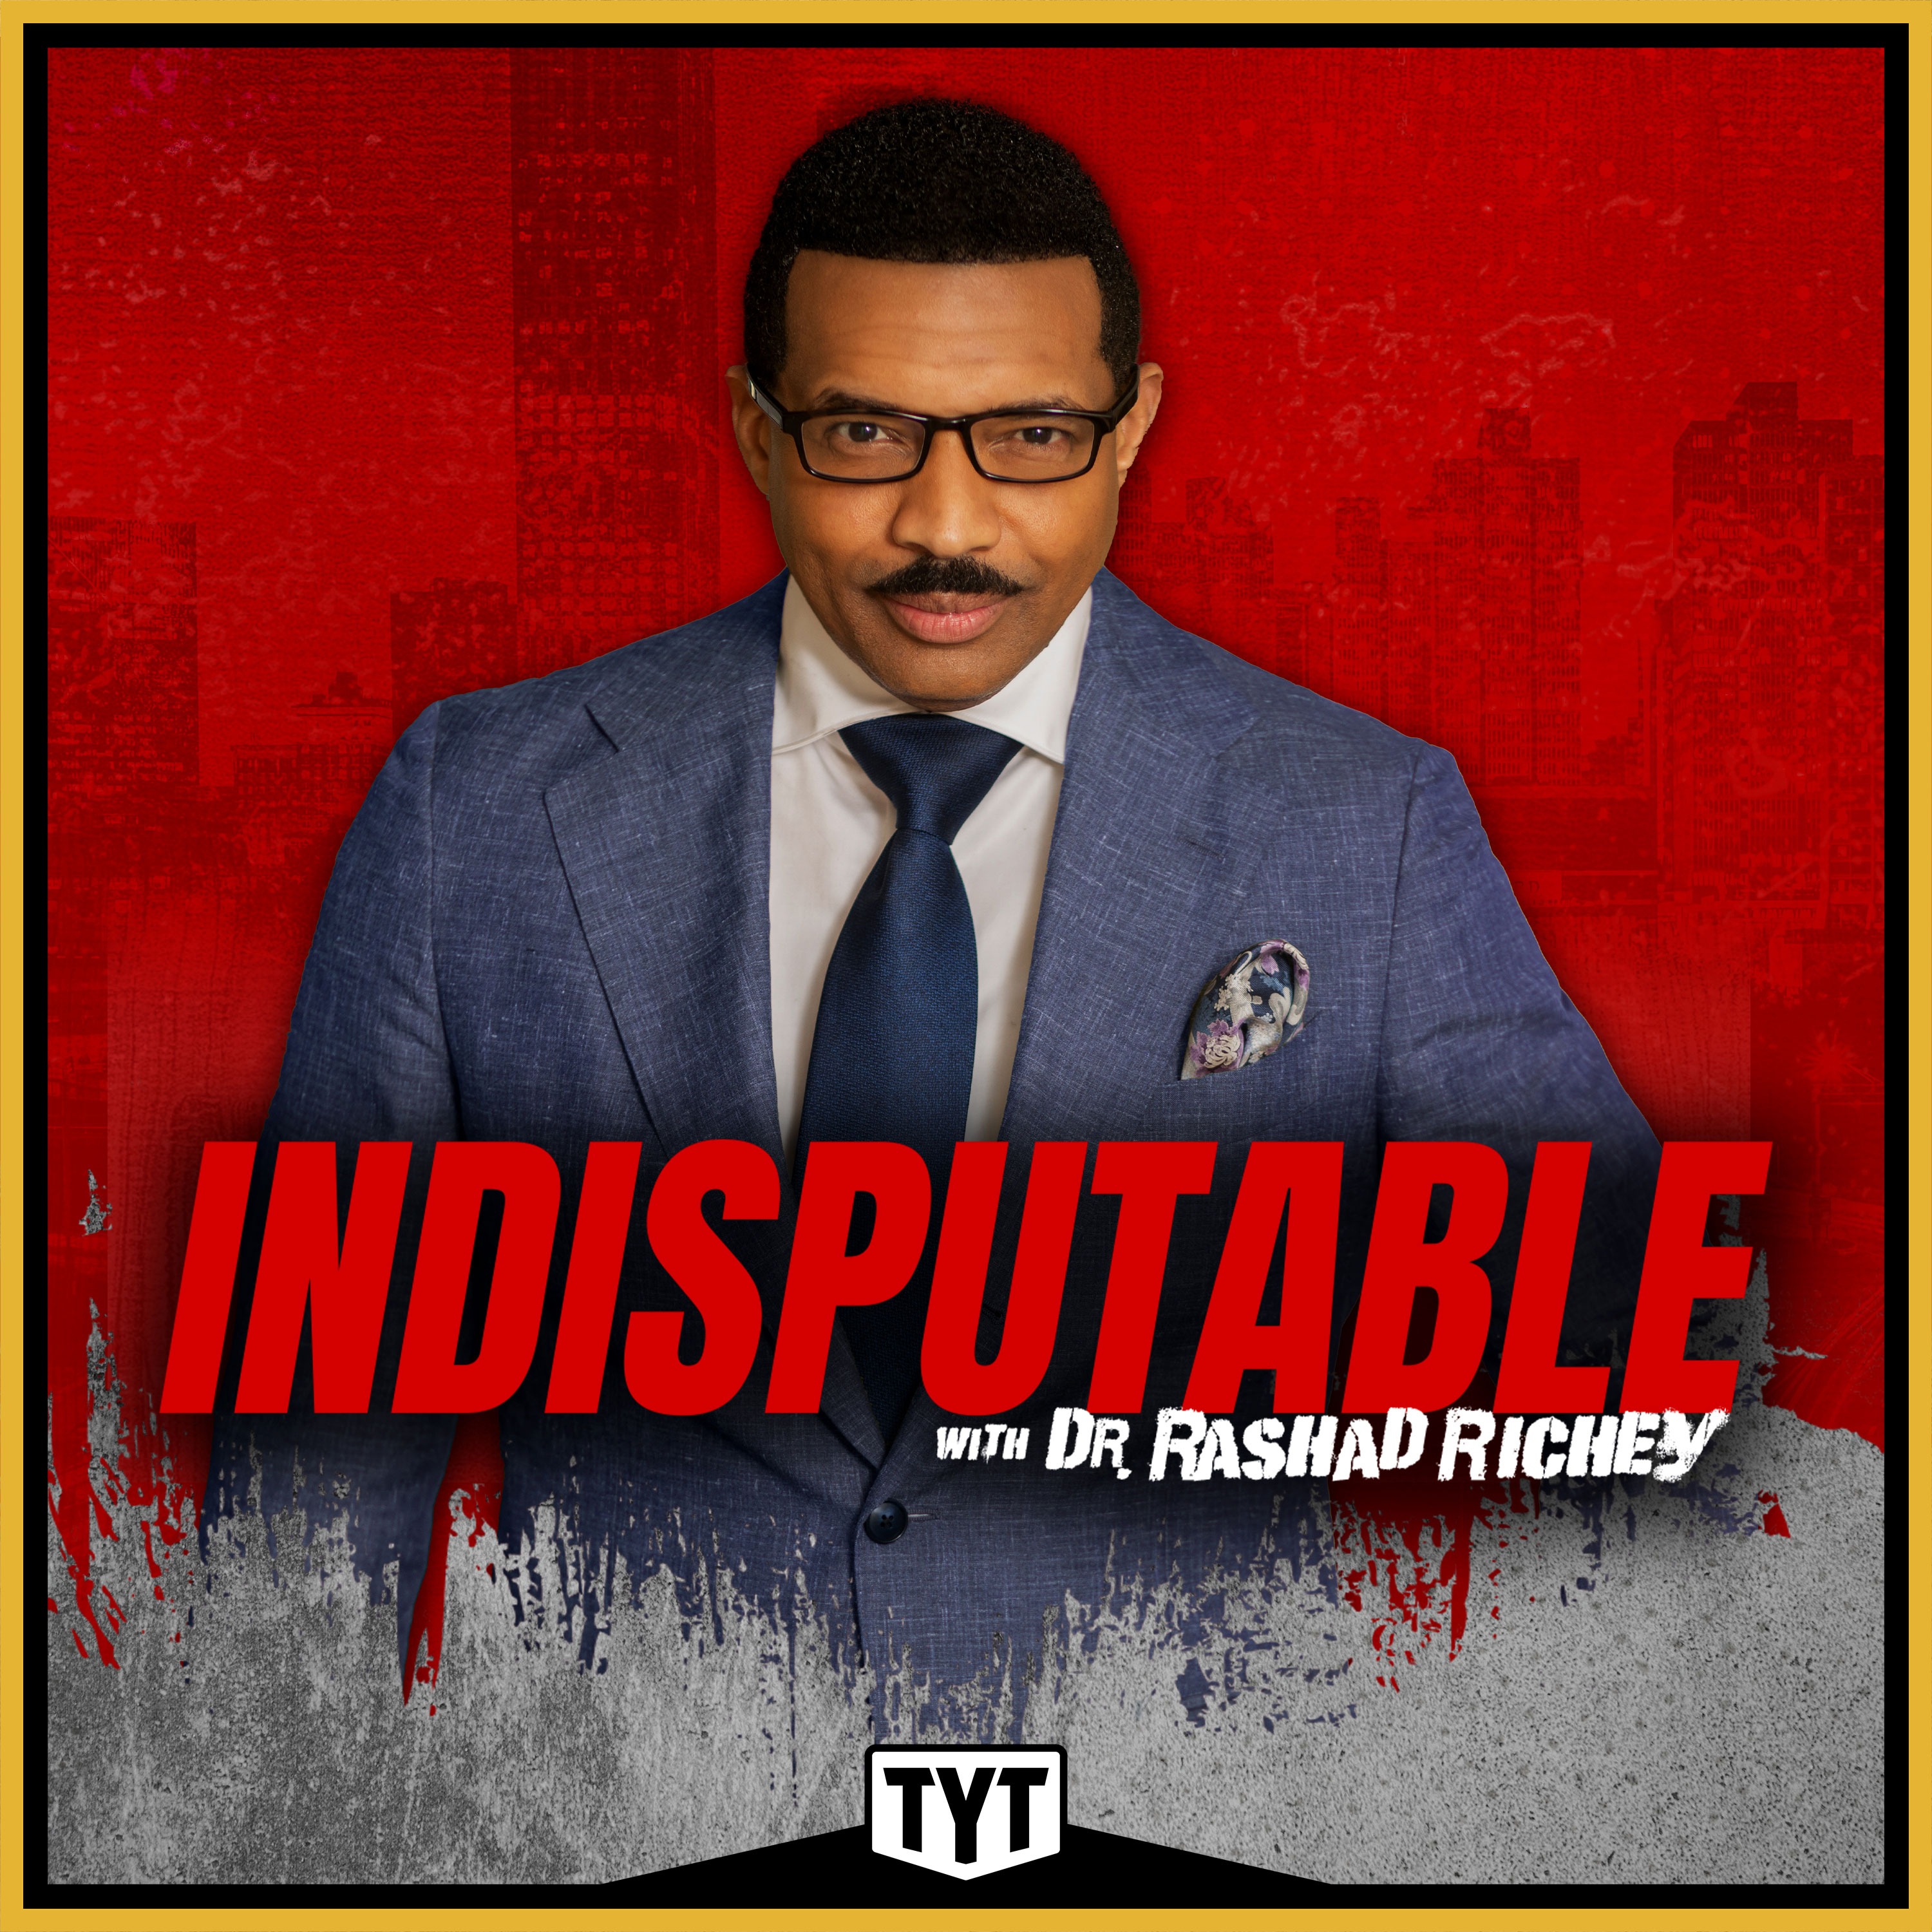 Indisputable with Dr. Rashad Richey:TYT Network